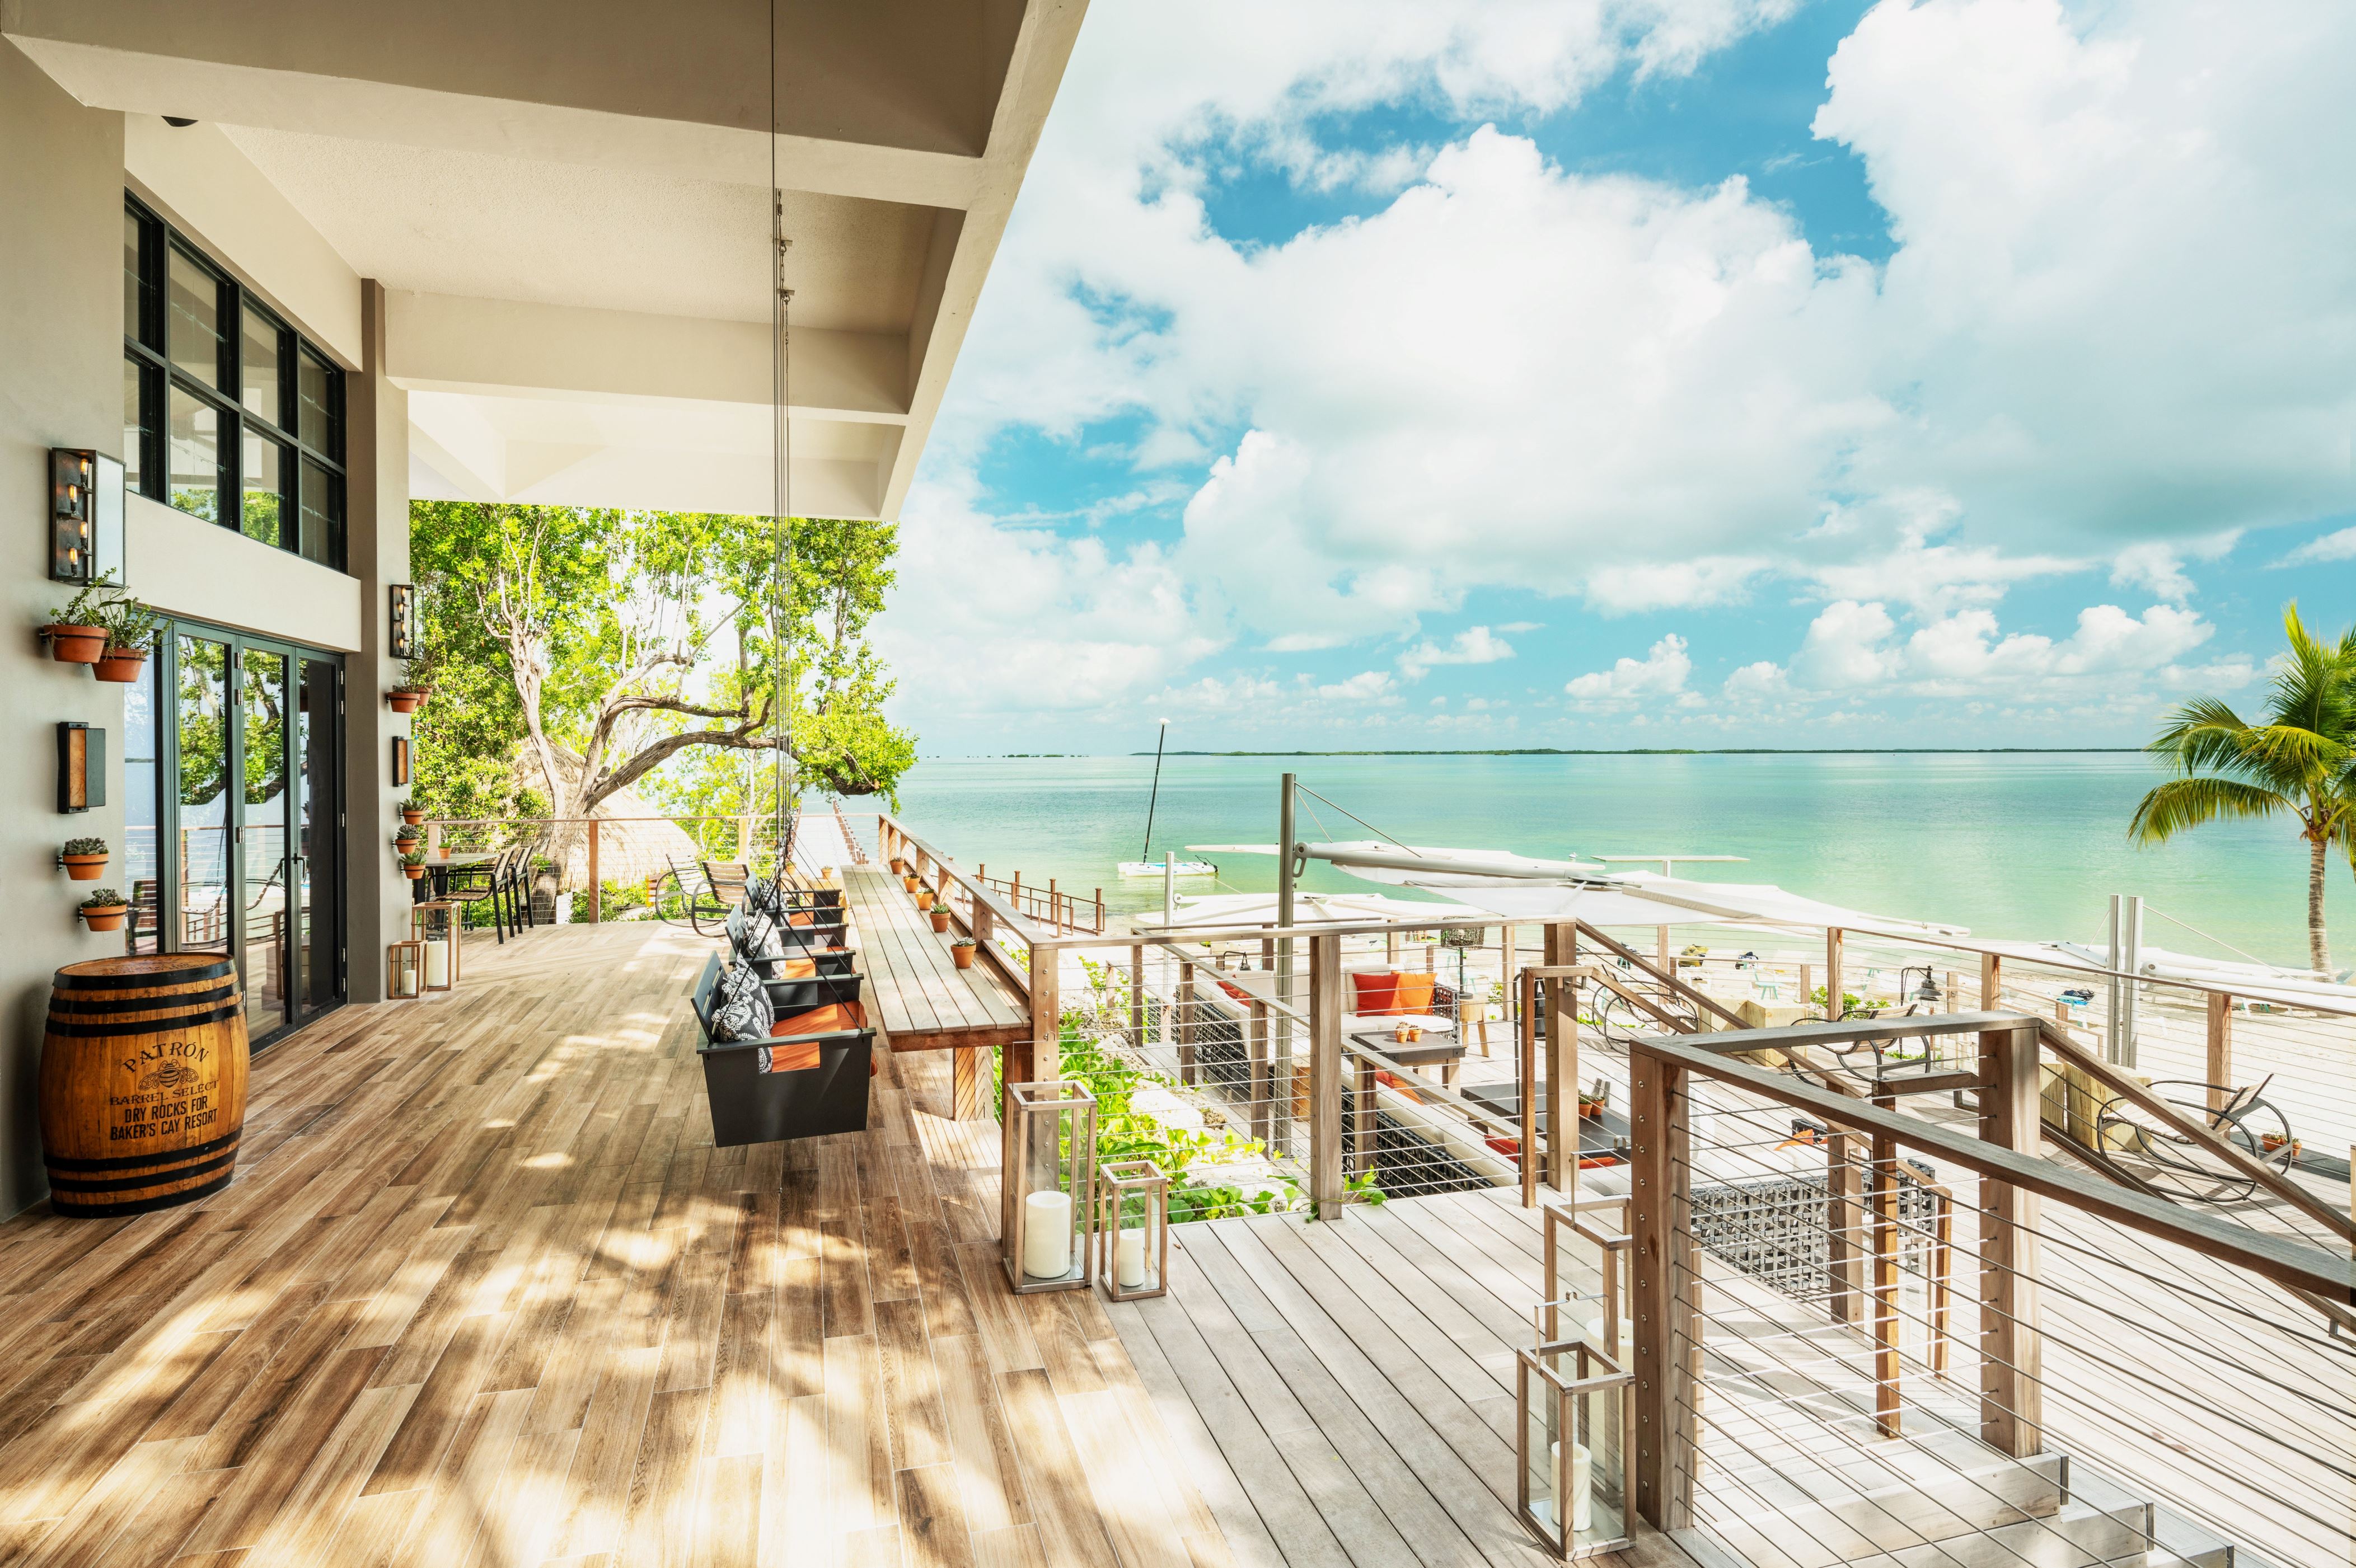 <p><strong>Why did this hotel catch your attention?</strong> <br> Whitewashed and modern, with tall ceilings and walls of windows, Baker's Cay Resort Key Largo is the epitome of contemporary island style.</p> <p><strong>What's the backstory?</strong><br> The resort is a member of Hilton's Curio Collection.</p> <p><strong>Tell us all about the accommodations. What can we expect from our rooms?</strong><br> Rooms feature hardwood floors, vaguely tribal patterns punctuated with coastal elements, and sleek, modern bathrooms.</p> <p><strong>Is there a charge for Wi-Fi?</strong><br> Wi-Fi is included in the resort fee.</p> <p><strong>Drinking and dining—what are we looking at?</strong><br> There's a nice variety of restaurants here. The indoor-outdoor Calusa does a la carte breakfast and dinner with a Caribbean-Creole slant. Tequila and tacos are on the menu at Dry Rocks; the Tiki Bar, meanwhile, is as advertised: all drinks, all the time. The pool features a mobile food truck serving snacks and sips. The hotel even has a hook-and-cook program; if you get lucky on your fishing excursion, you can bring your catch to the kitchen.</p> <p><strong>How about the service?</strong> Everything is taken care of here; staff is on hand to ensure you're never bored. There's even a director of pet relations.</p> <p><strong>What type of travelers will you find here?</strong><br> Relaxed vacationers come here for a balance of rest and play.</p> <p><strong>What about the neighborhood? Does the hotel fit in, make itself part of the scene?</strong><br> Key Largo can be a bit touristy on the main drag—KFC, tacky T-shirt shops, that sort of thing—but this resort is a chic departure from that.</p> <p><strong>Any other hotel features worth noting?</strong><br> There are two beaches: Hammock Beach, which tends to be quiet, and a more active beach where you can try your hand at watersports, from kayaking to paddleboarding (included in the resort fee). There's also a pool with waterfalls.</p> <p><strong>Bottom line: Worth it? Why?</strong><br> This is a quiet, chic Keys escape that's close to <a href="https://www.cntraveler.com/destinations/miami?mbid=synd_msn_rss">Miami</a>—and just as much fun.</p>